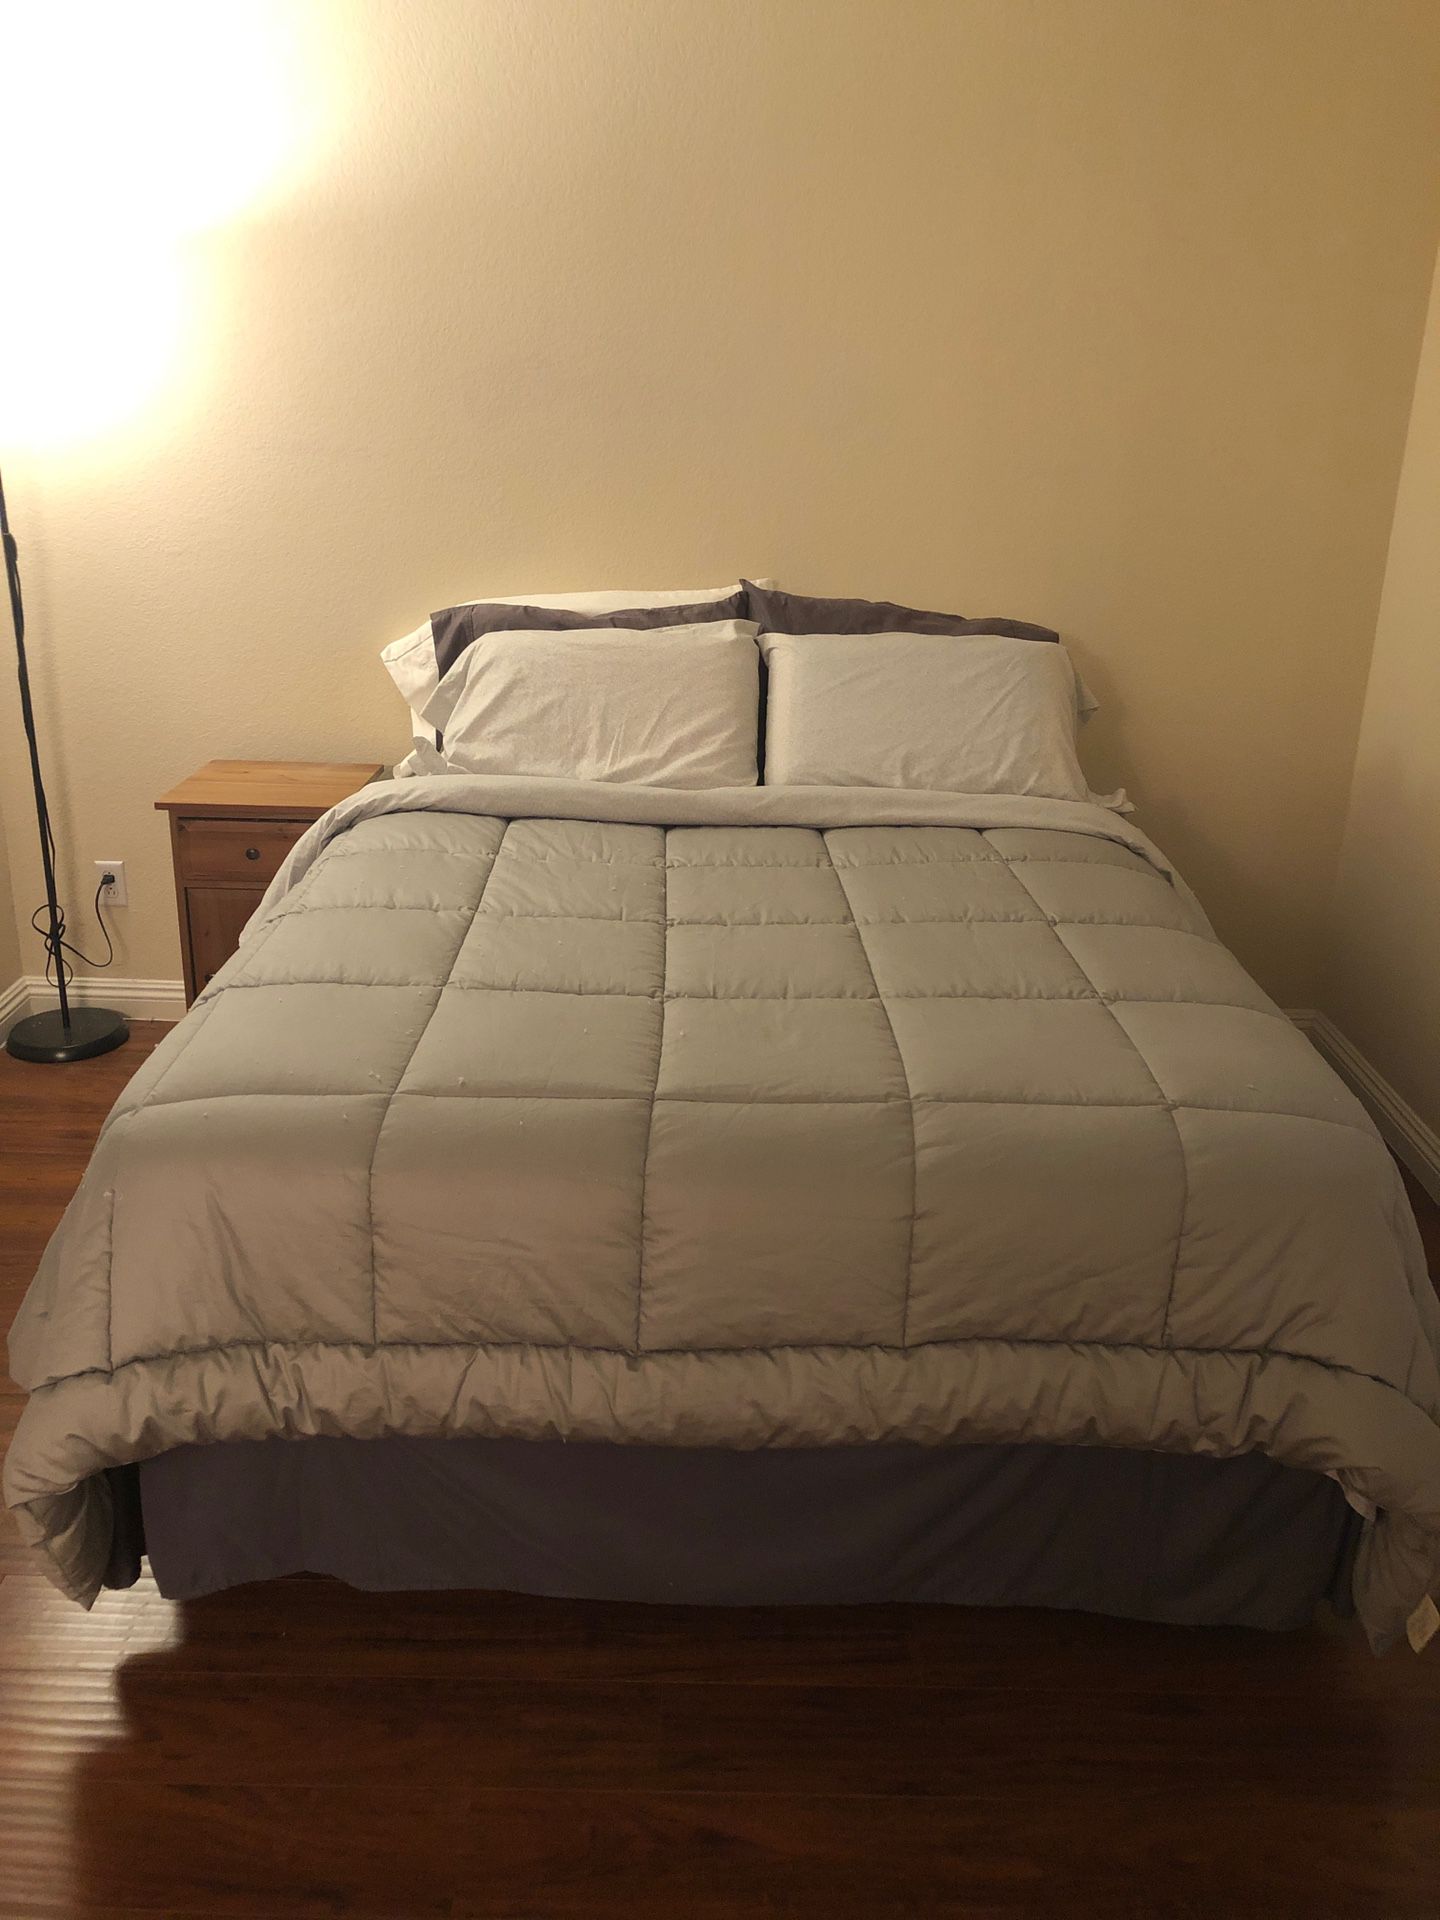 Sealy Posturpedic (Firm) Queen Bed With Frame